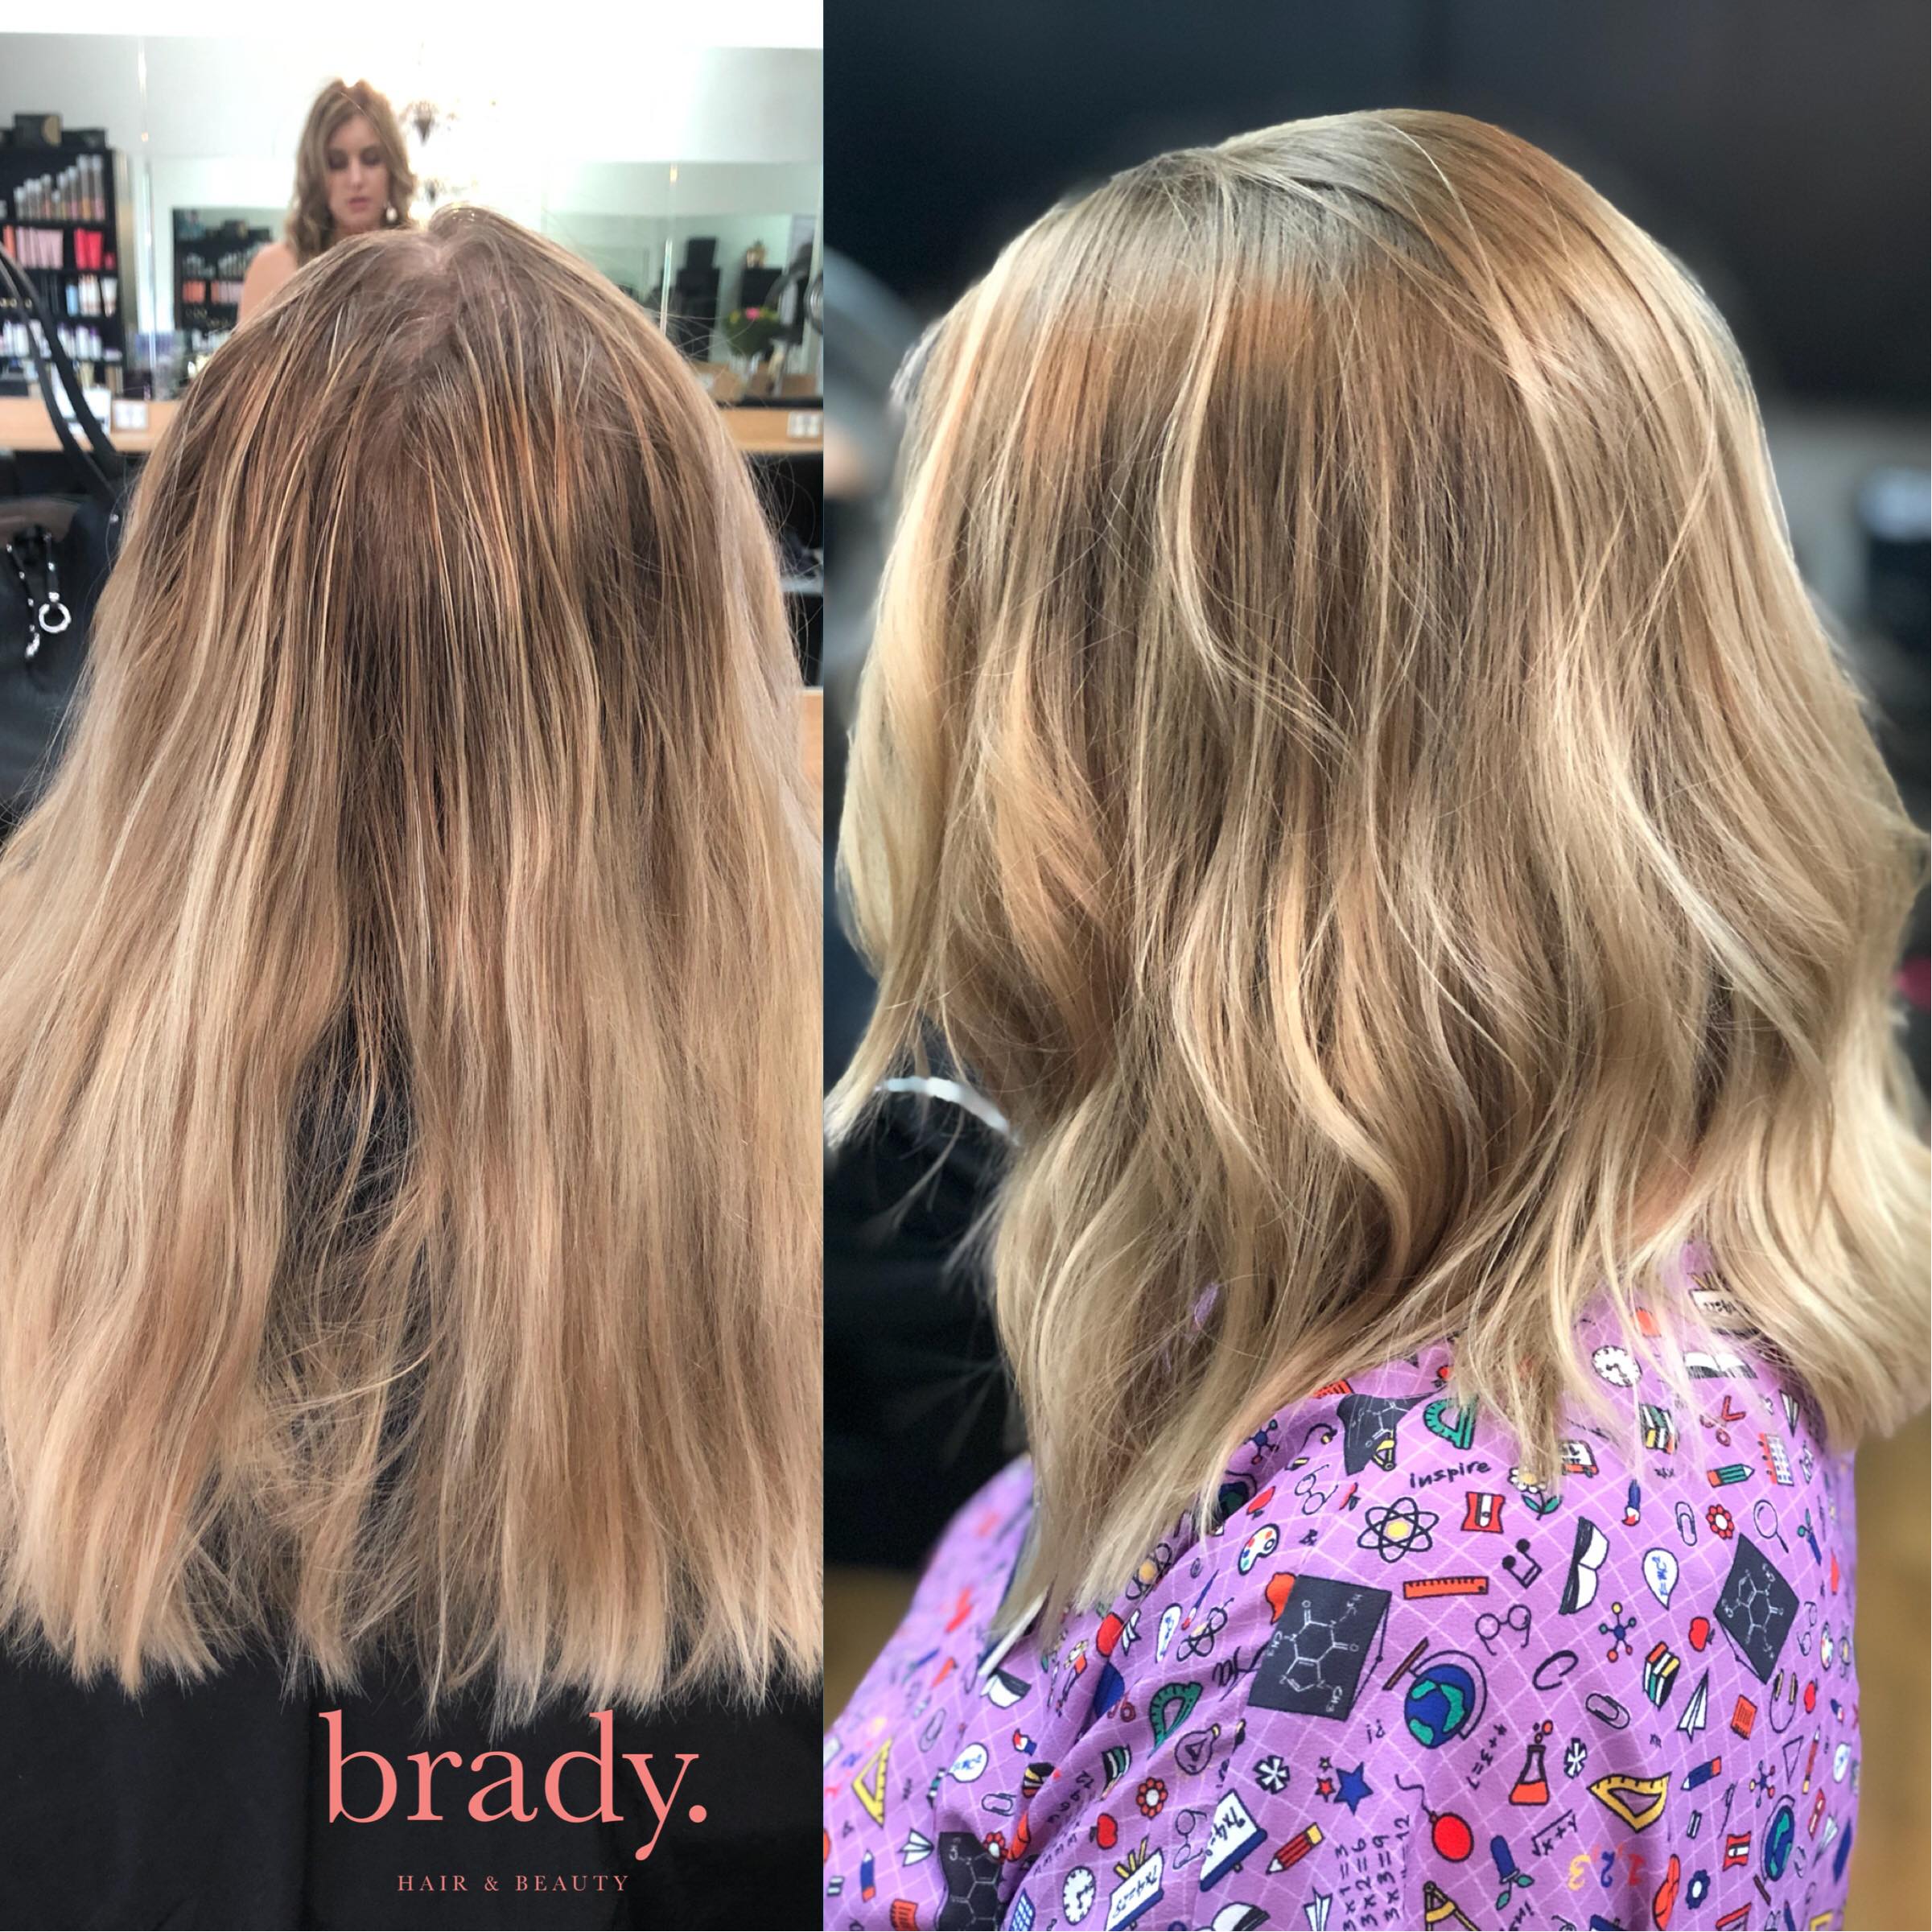  Before and after picture of hairstyle. Final result: woman with medium ash blonde wavy hair. Styled by Brady. Hair &amp; Beauty, Toowong, Brisbane. 